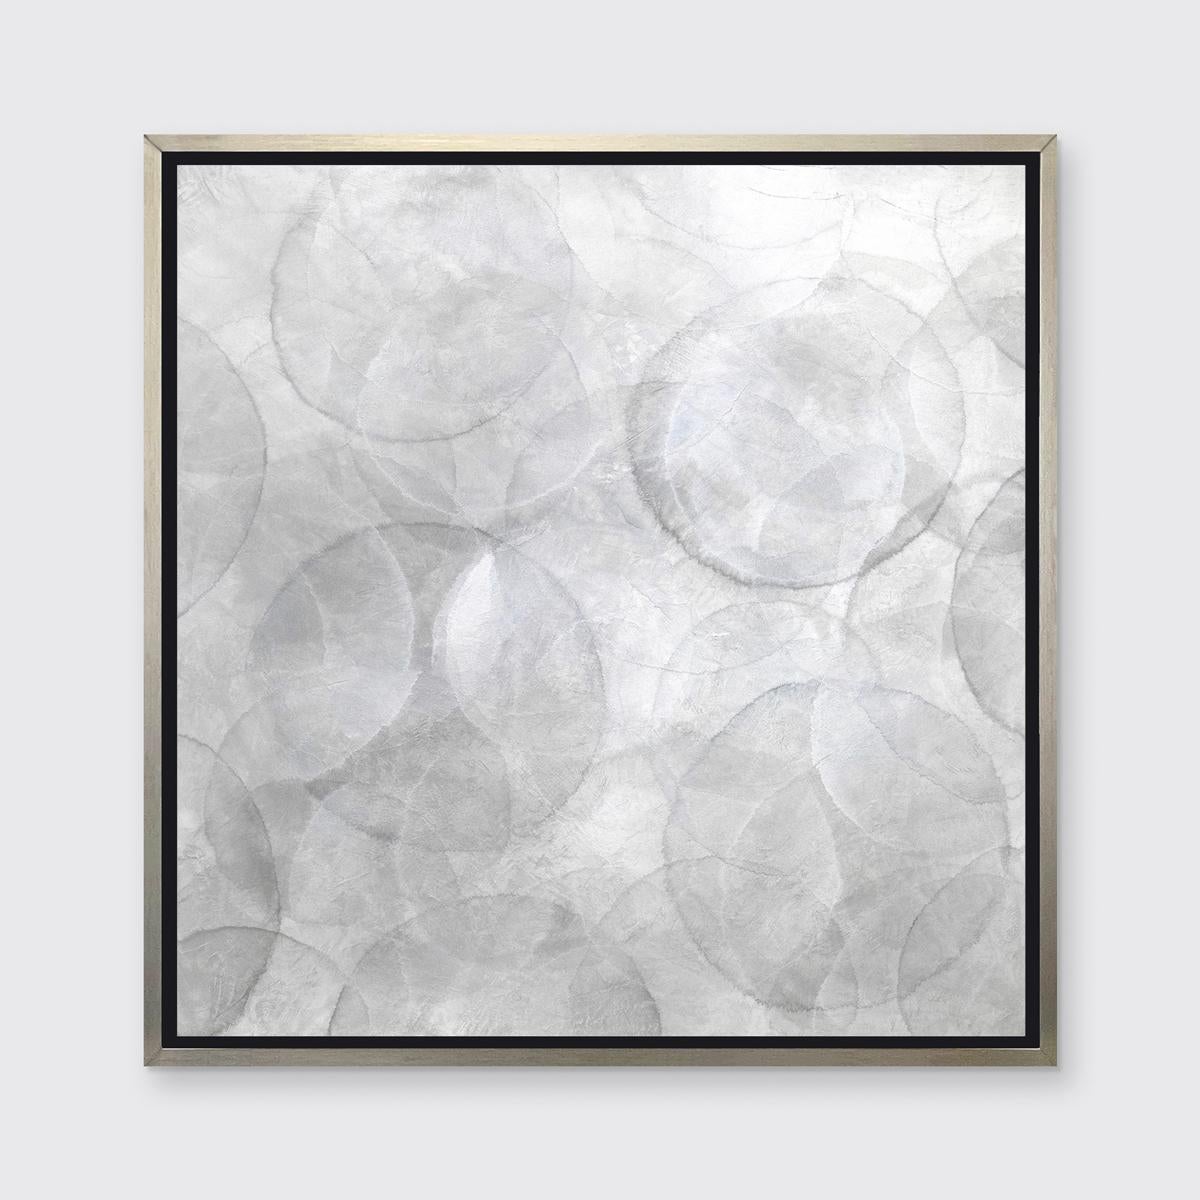 This Limited Edition giclee print by Roger Mudre features a light, silvery palette. Loose, transparent circular shapes are layered and patterned overtop of one another in different shades of grey. It is an edition size of 25. Printed on canvas, this